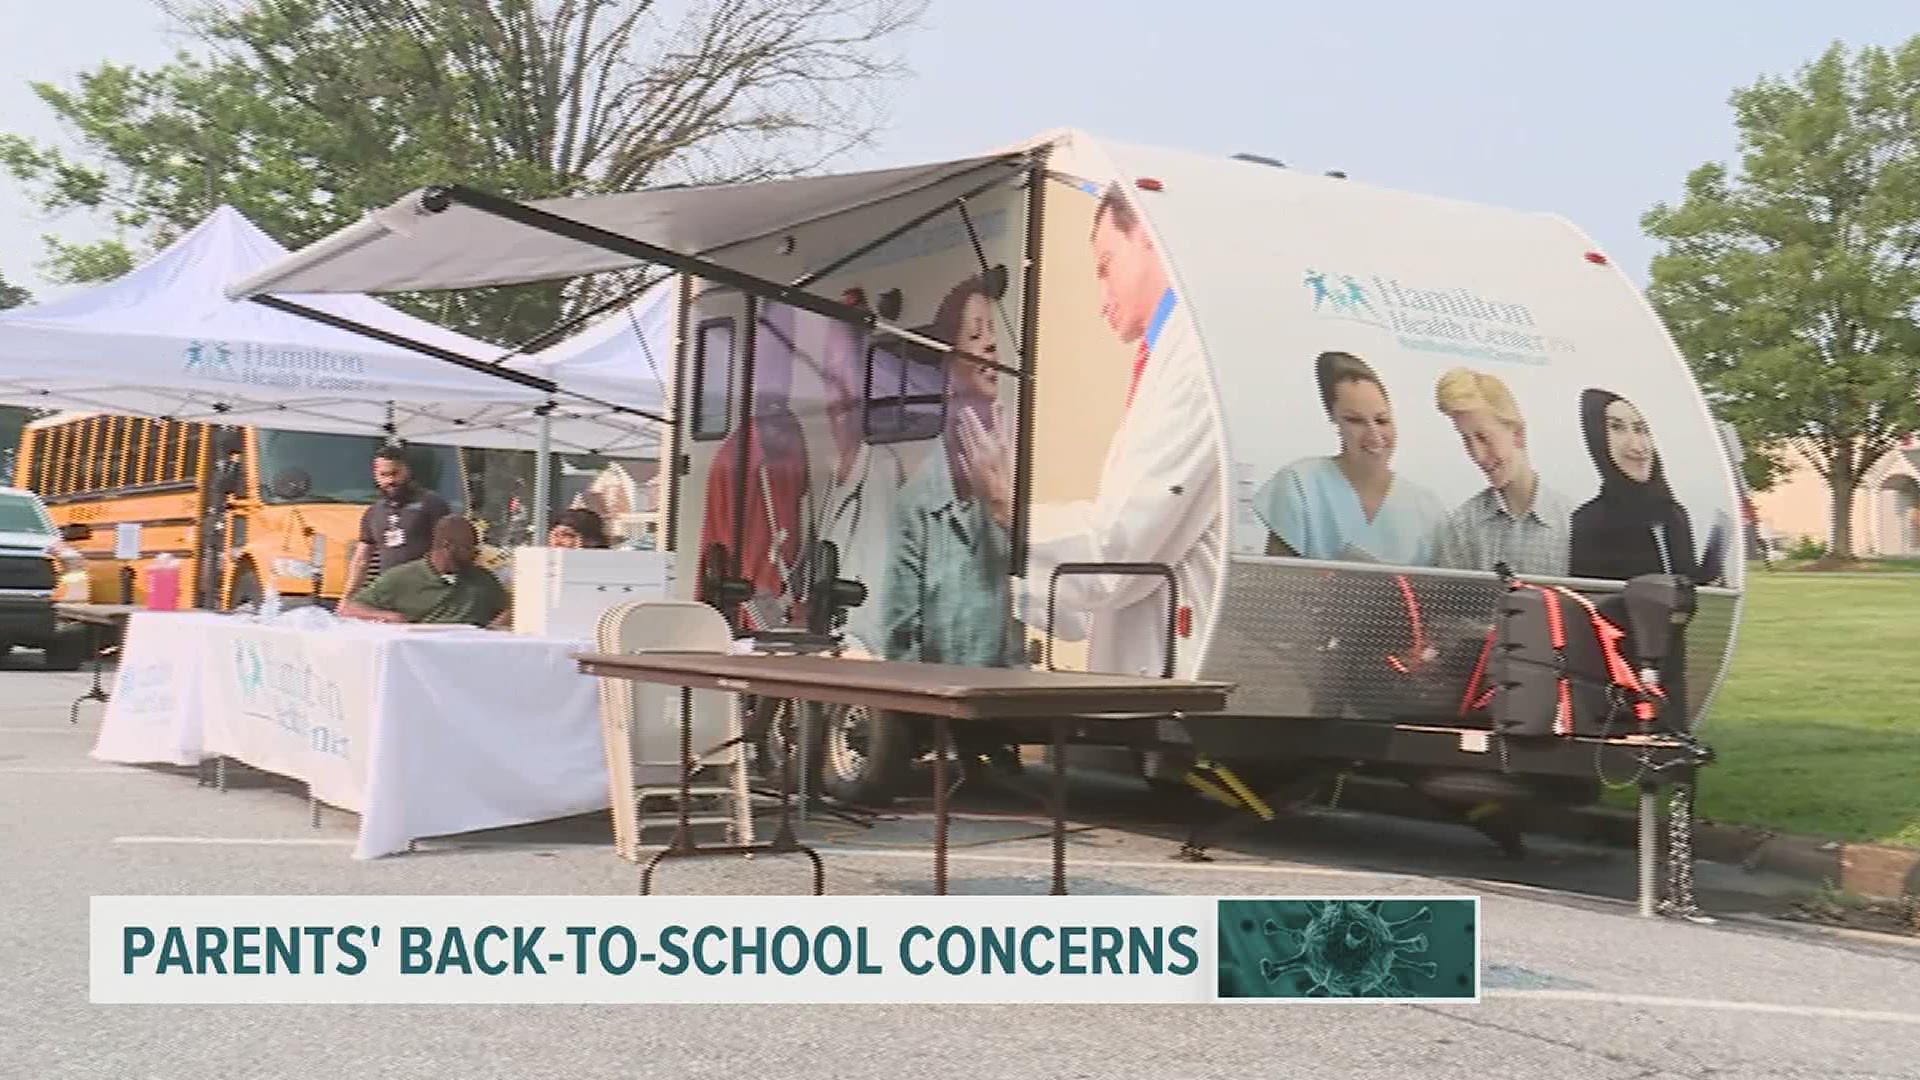 Many parents of school-age children remain concerned about coronavirus and its impacts in the coming school year.